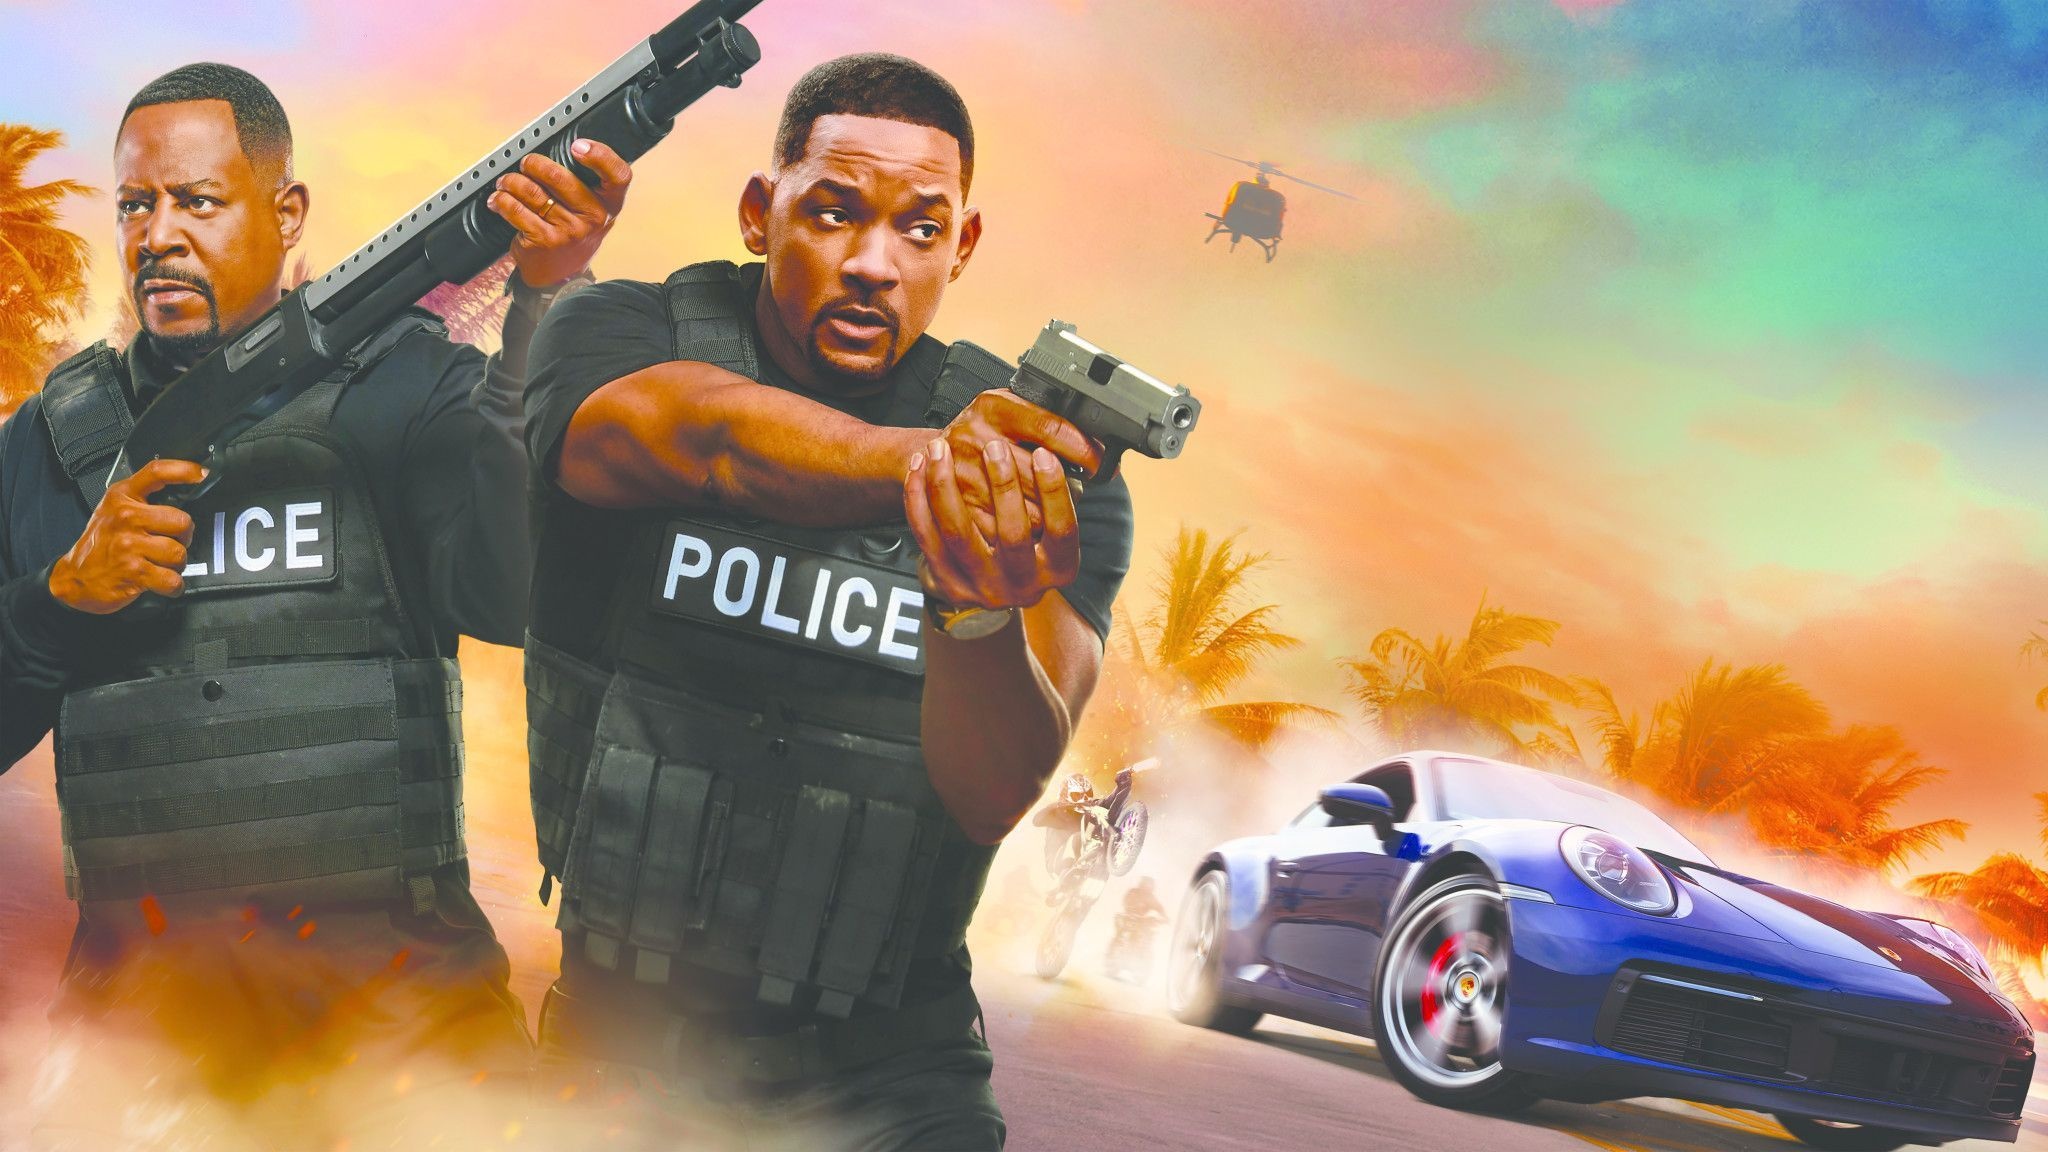 Bad Boys for Life wallpapers, Top backgrounds, 2050x1160 HD Desktop